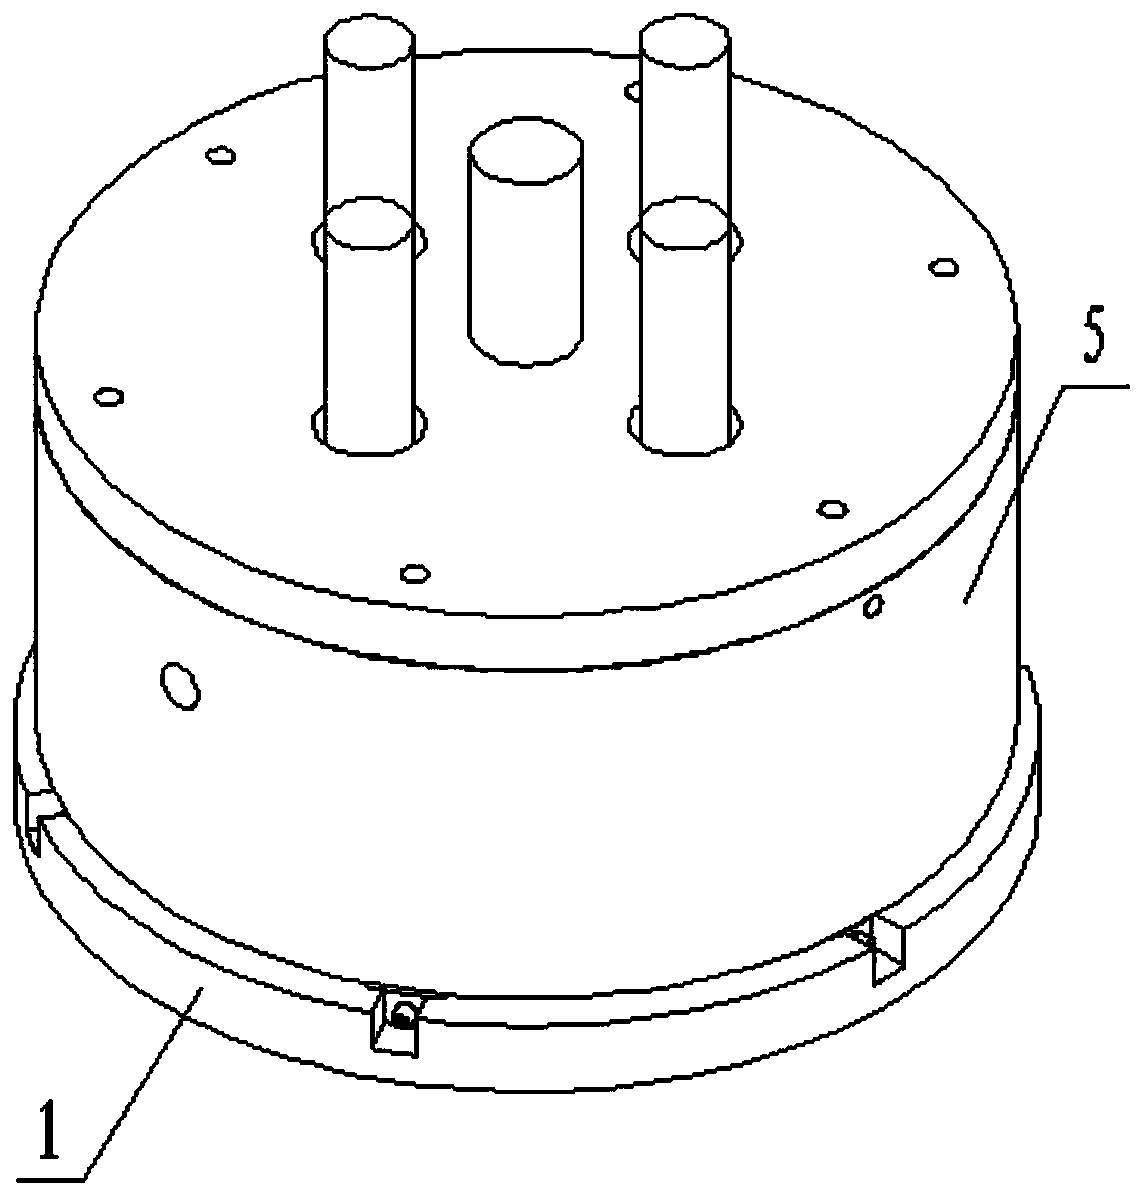 A carburized thin-walled ring gear combined pressure quenching tooling